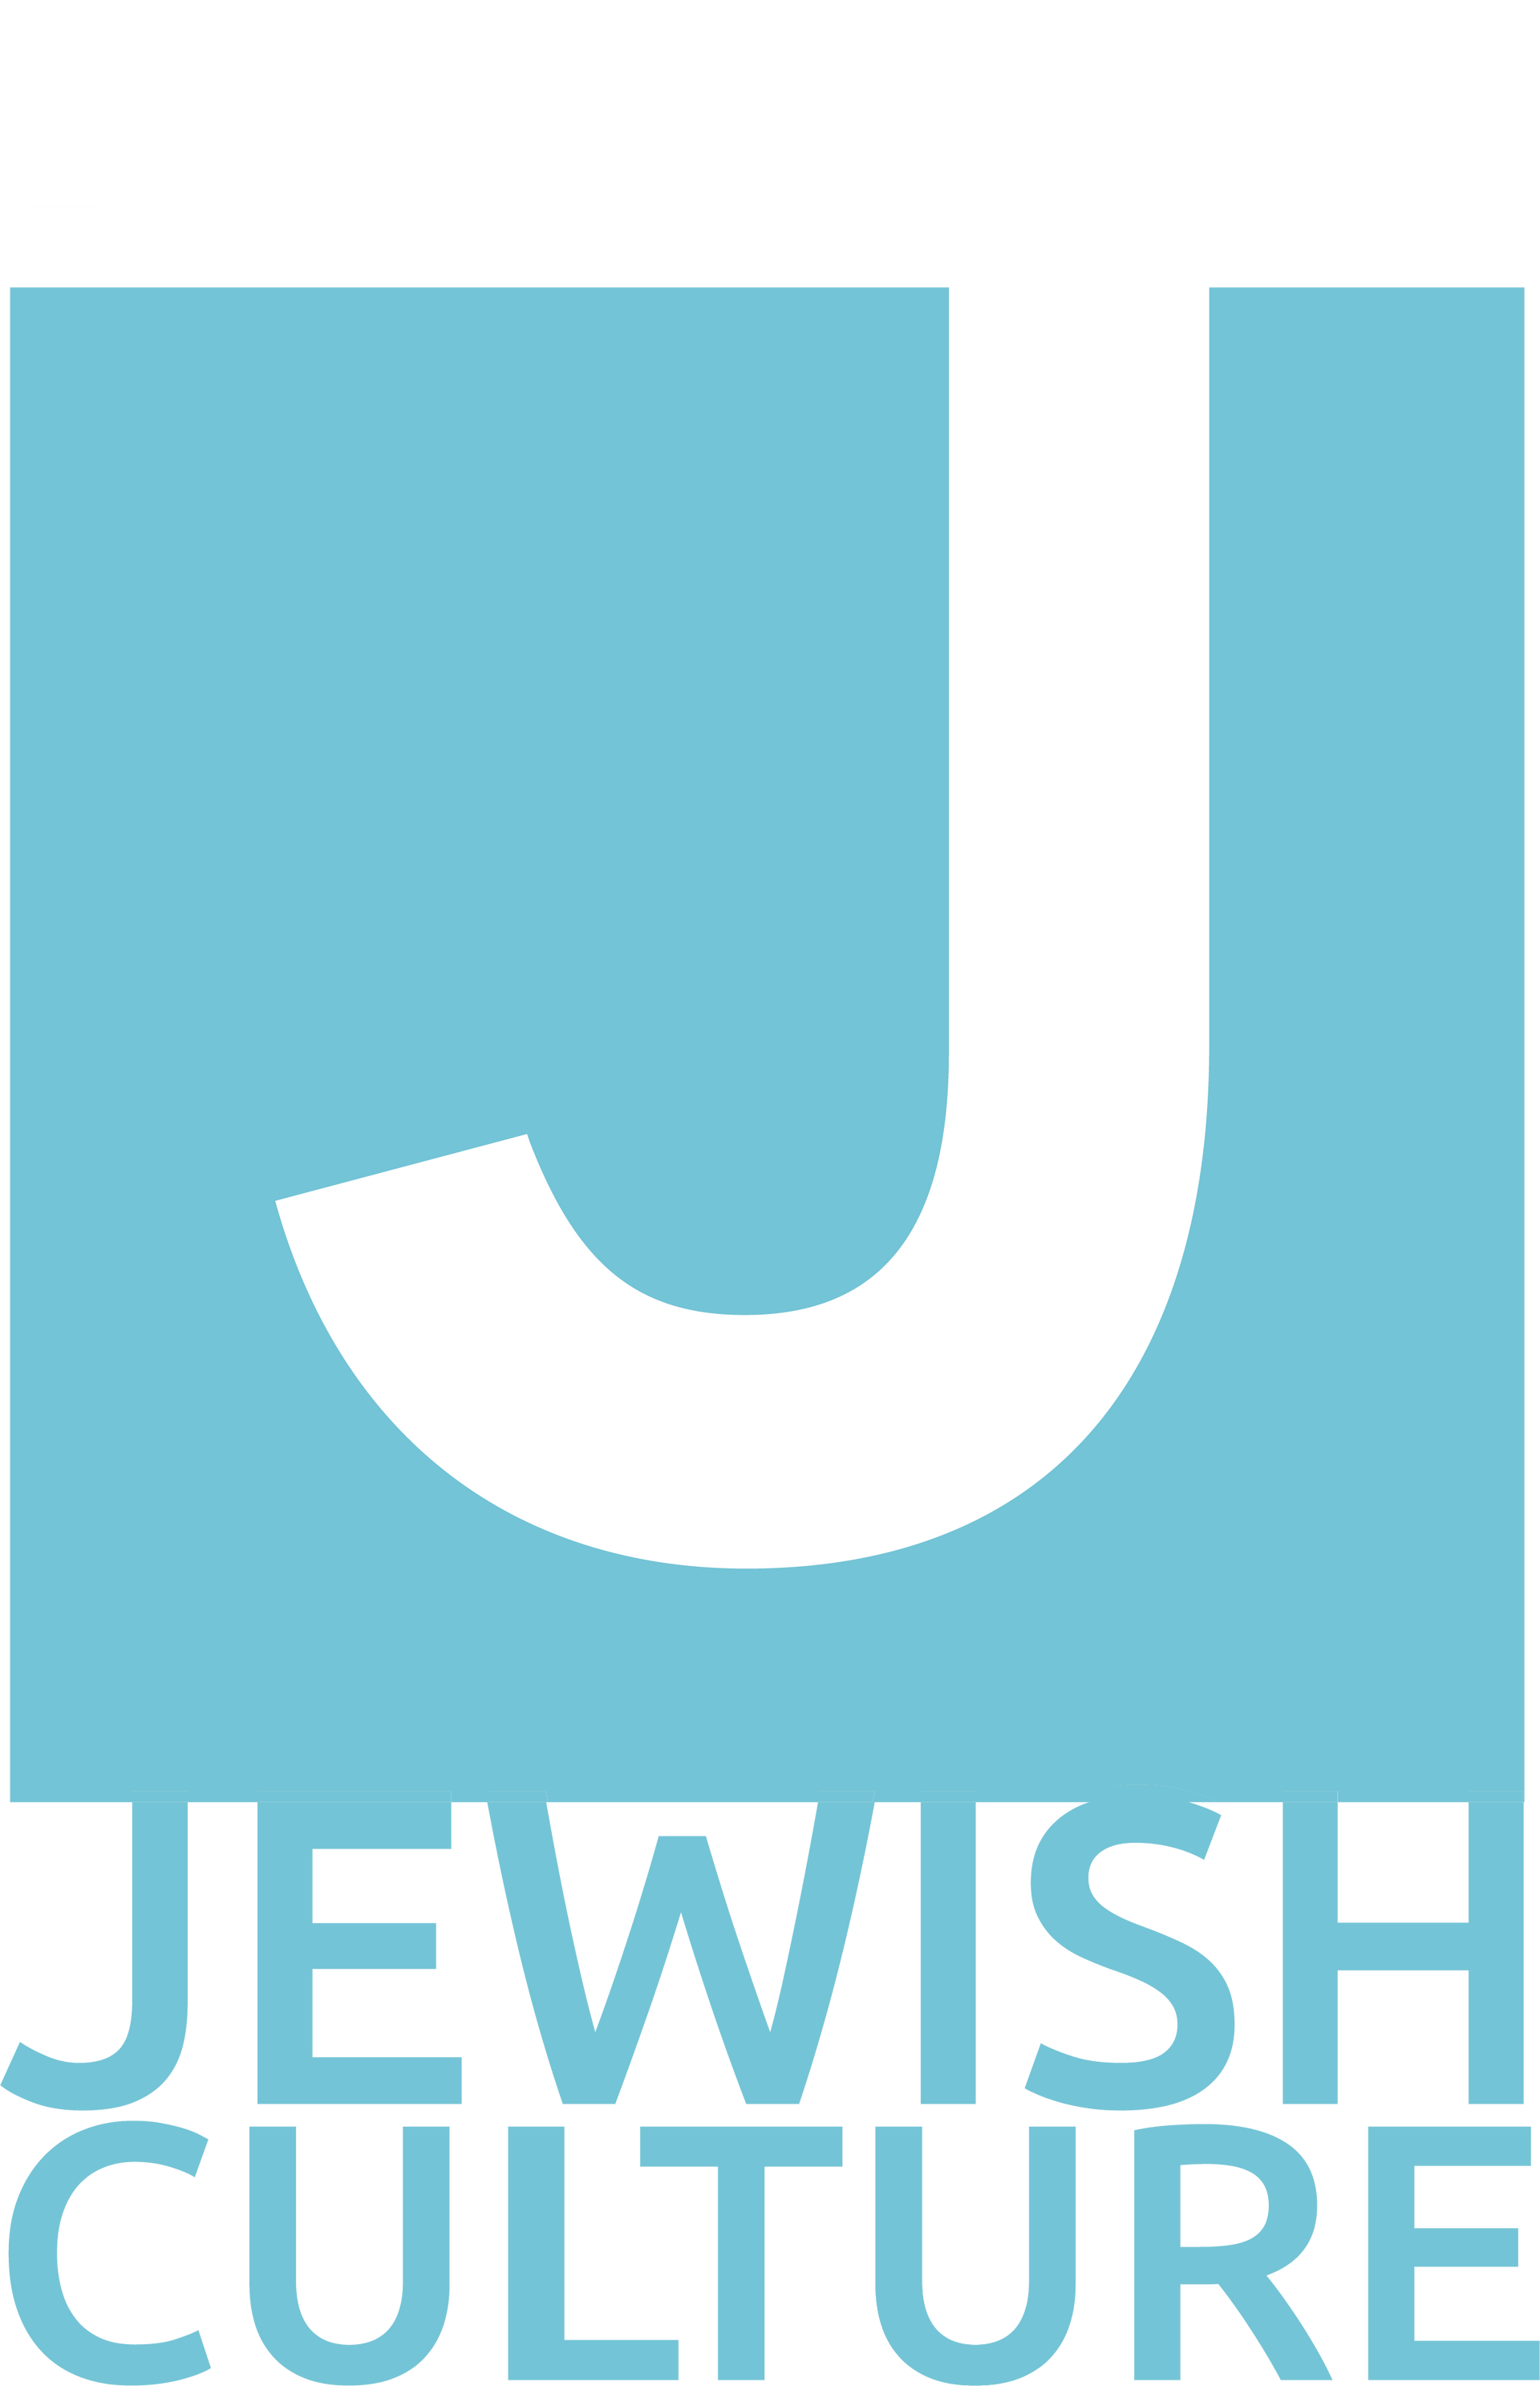 Logo of the JCC on a blue square with a white letter j in the middle.